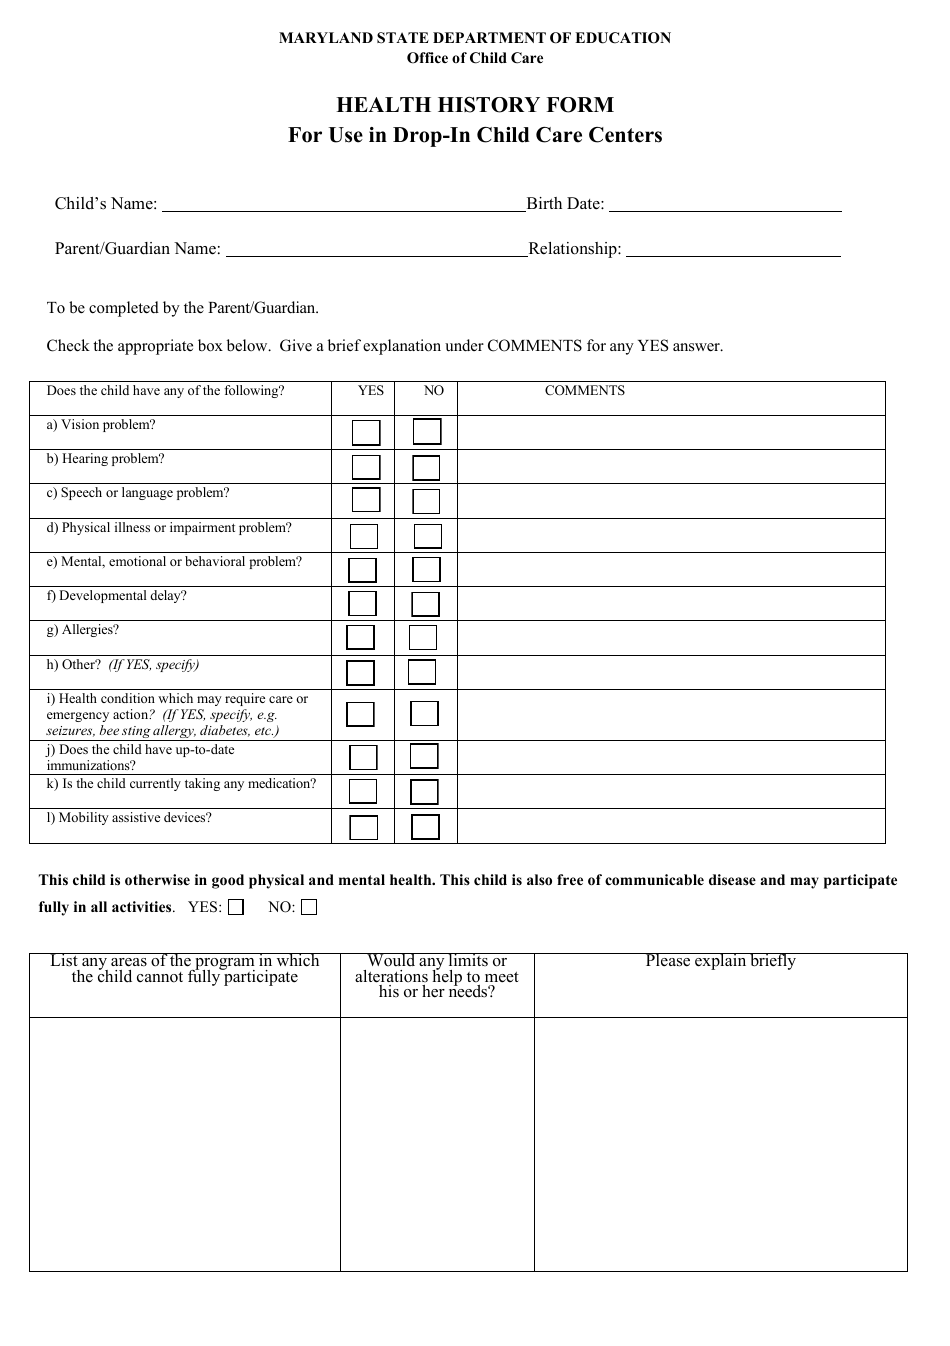 Form OCC1285 Health History Form for Use in Drop-In Child Care Centers - Maryland, Page 1